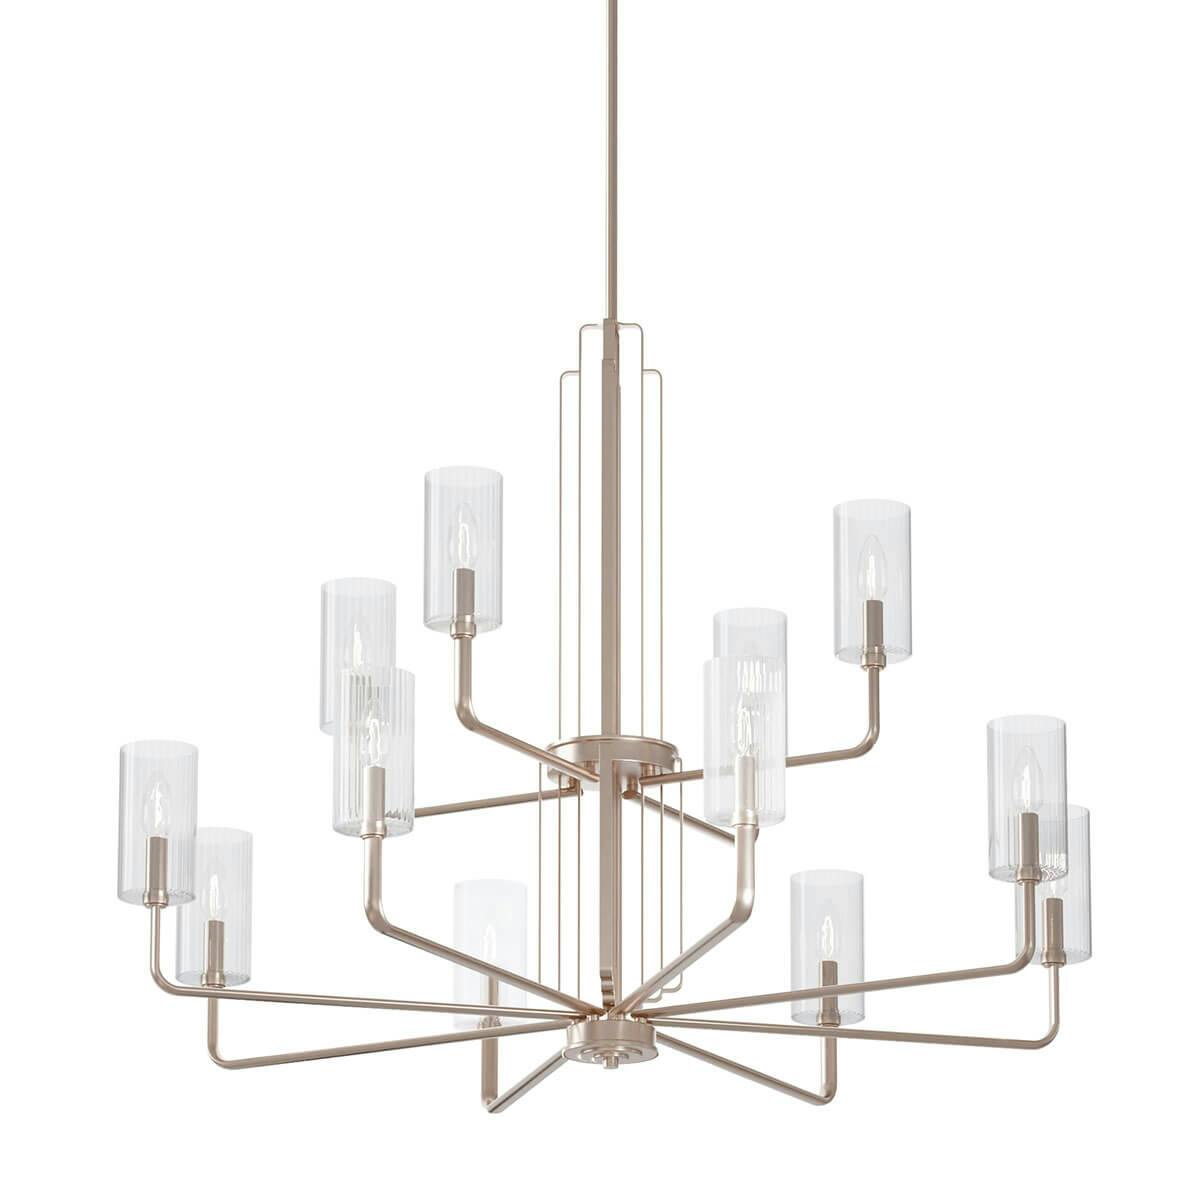 Kimrose 12 Light Chandelier Nickel without the canopy on a white background